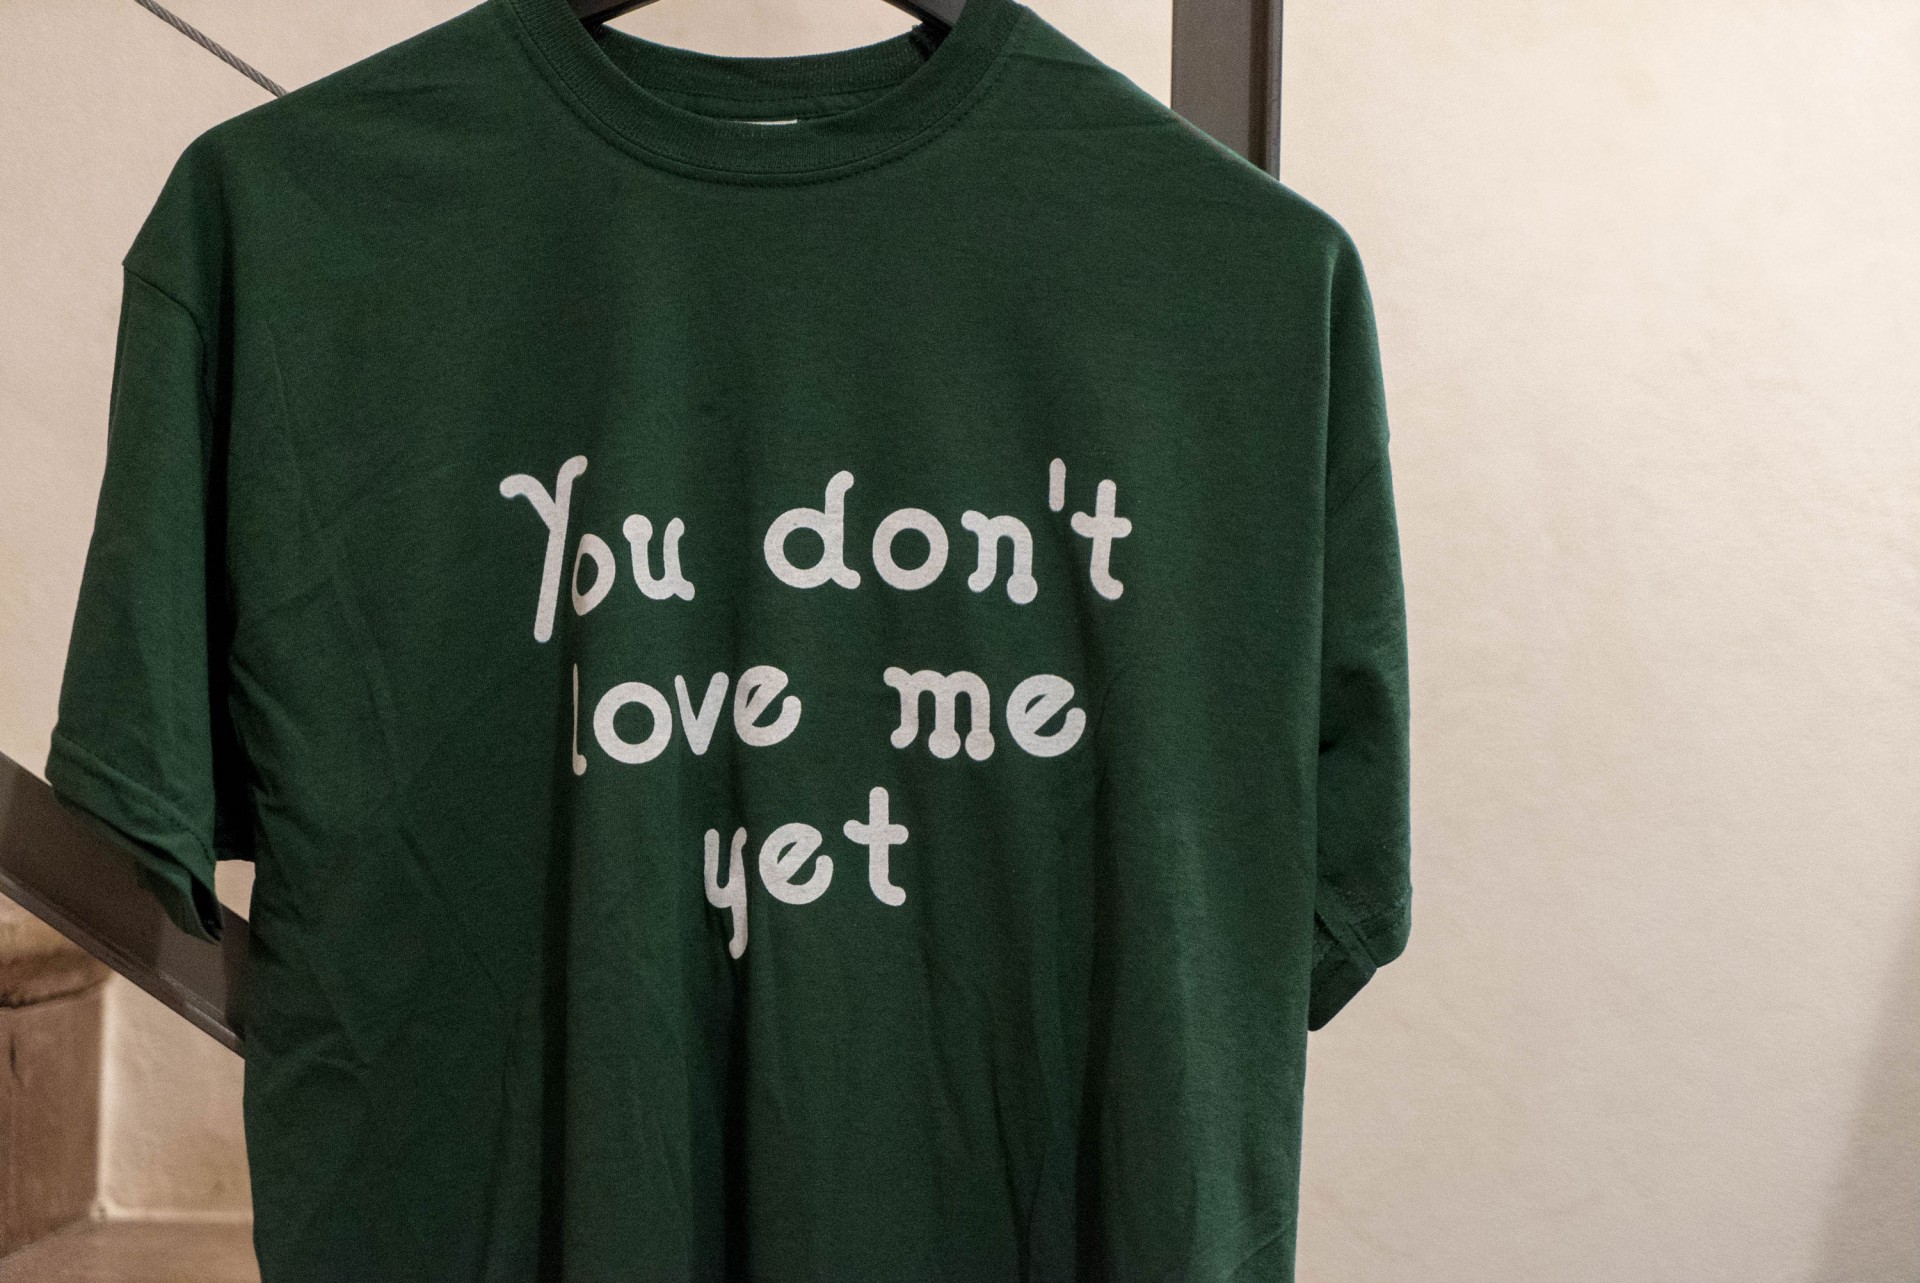 Johanna Billing 15 Years of You Don’t Love Me Yet — Galleria Laveronica, Modica, 2018